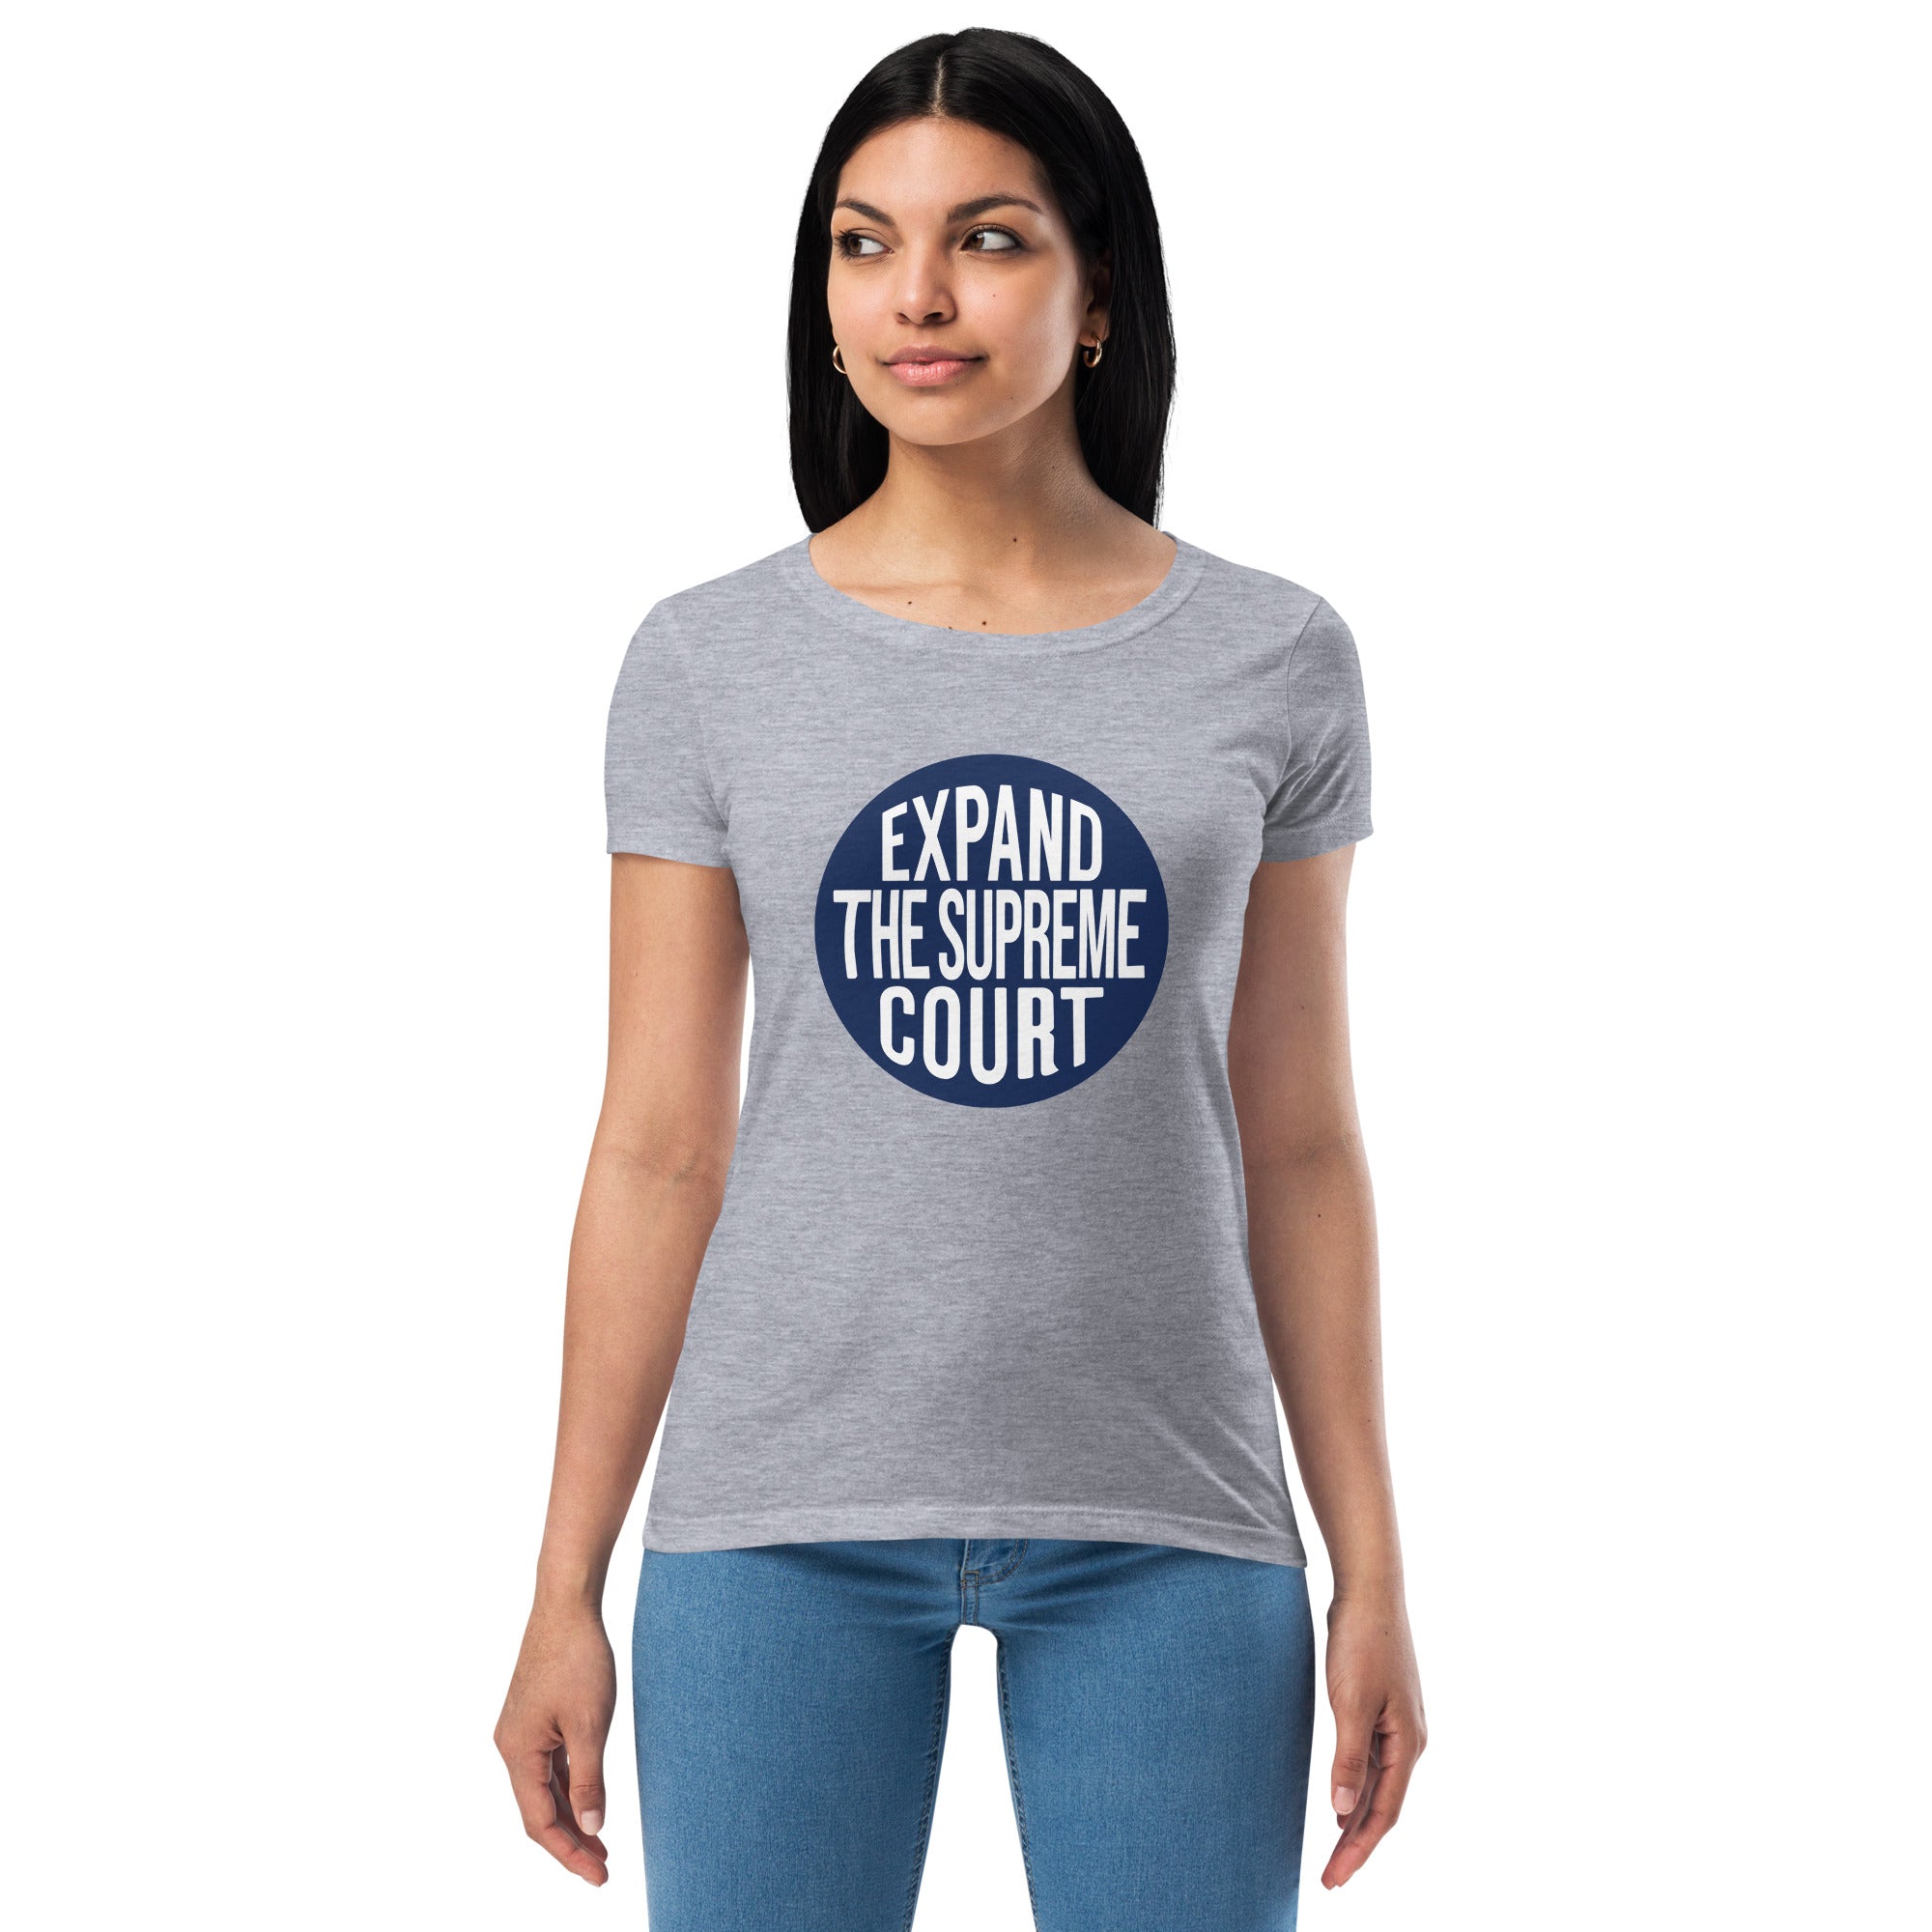 EXPAND THE SUPREME COURT (Women’s fitted t-shirt)